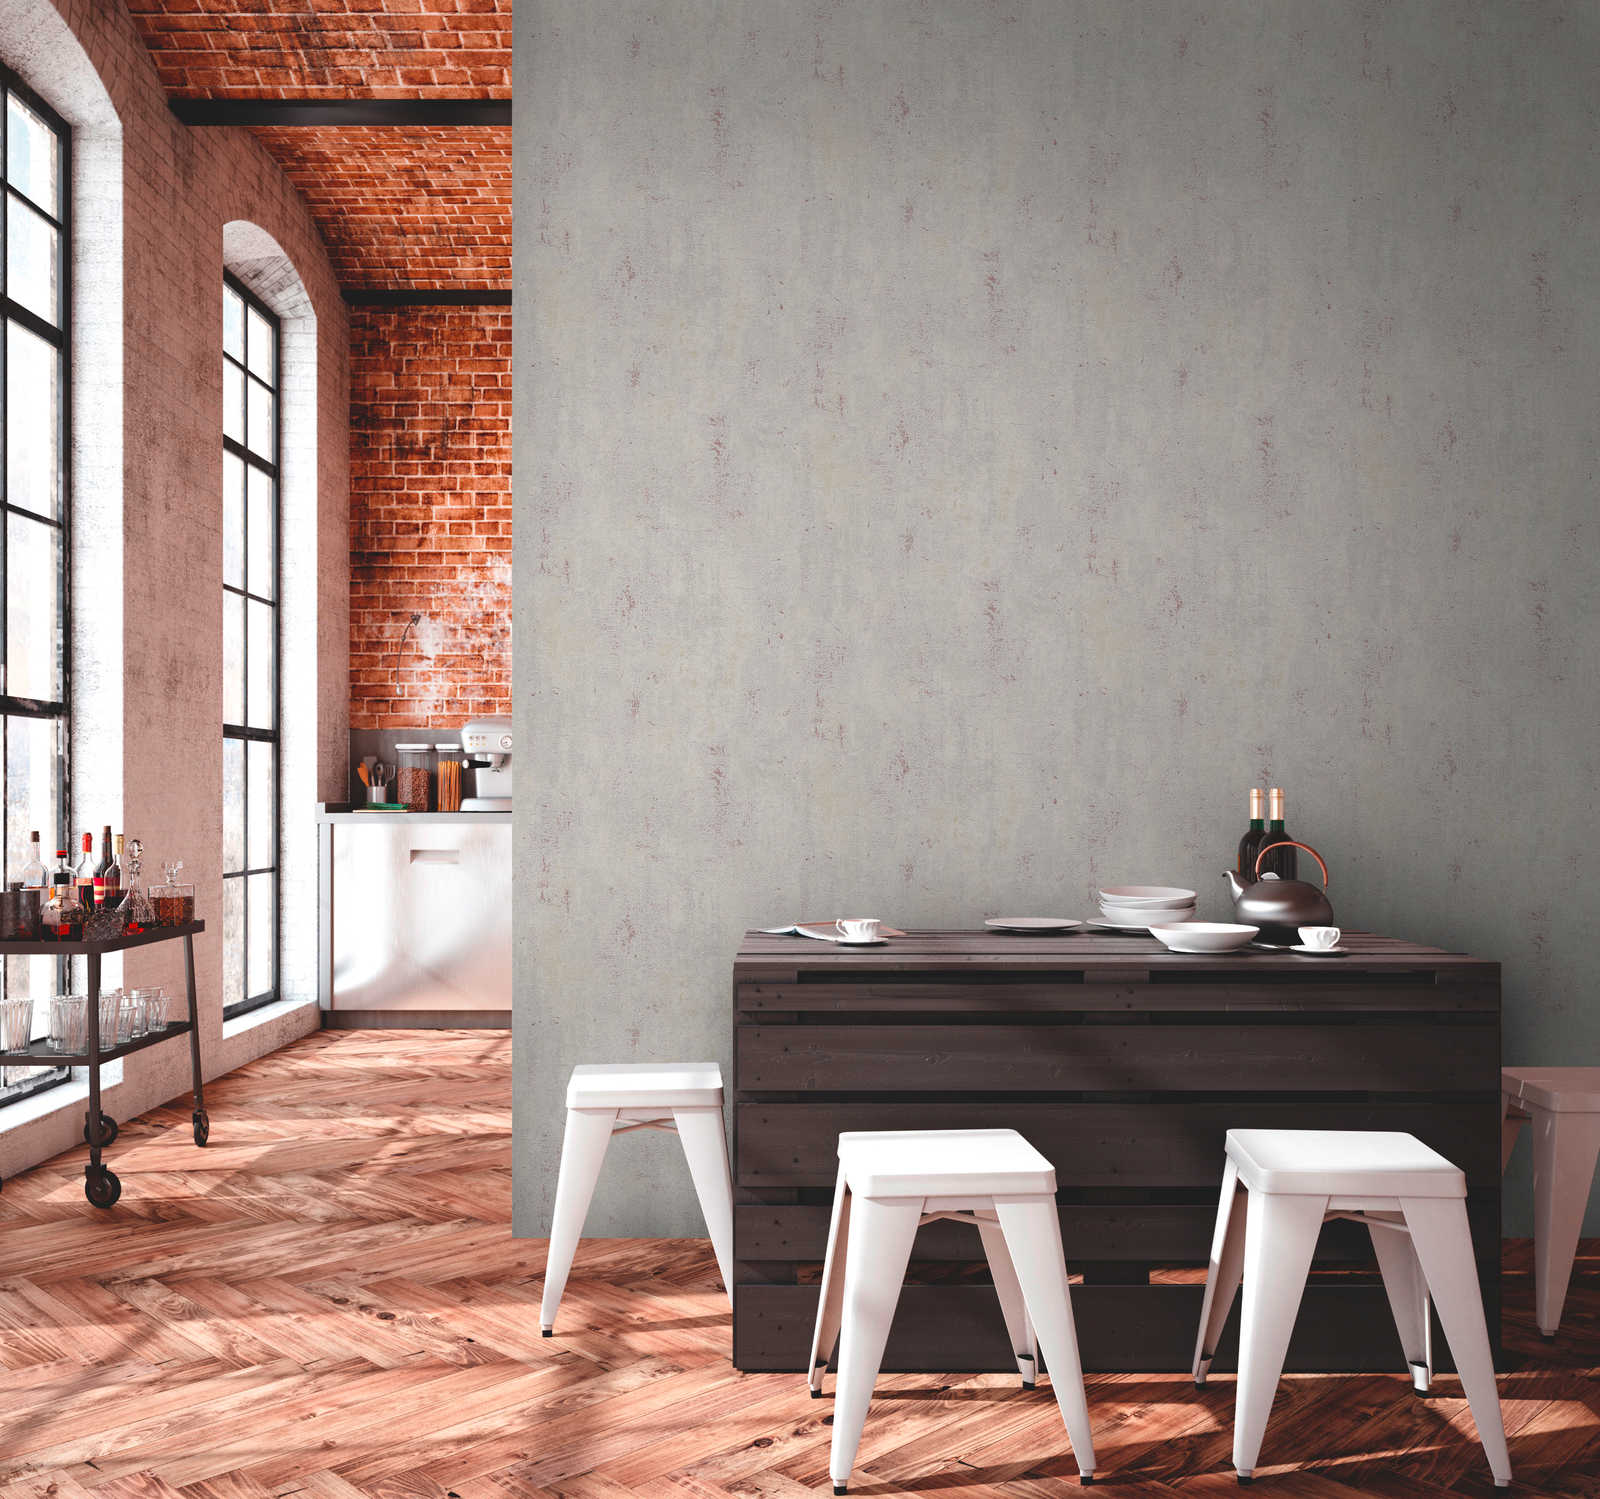             Concrete wallpaper with rustic industrial design - beige, grey, red
        